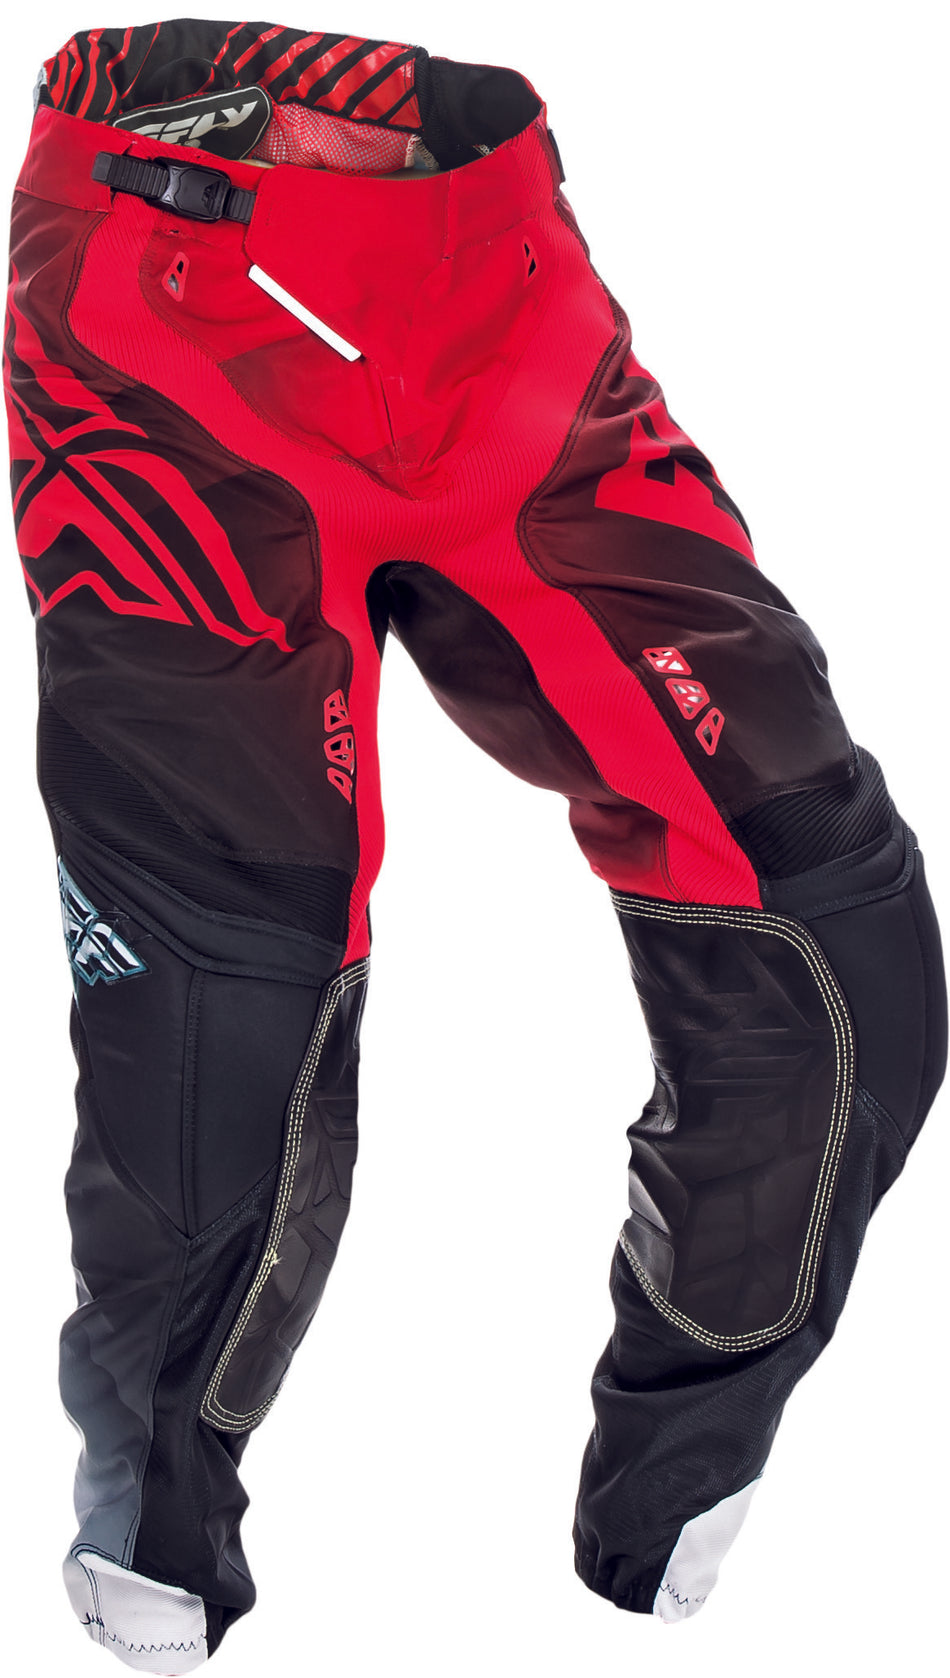 FLY RACING Lite Hydrogen Pant Red/Black/White Sz 34 370-73234